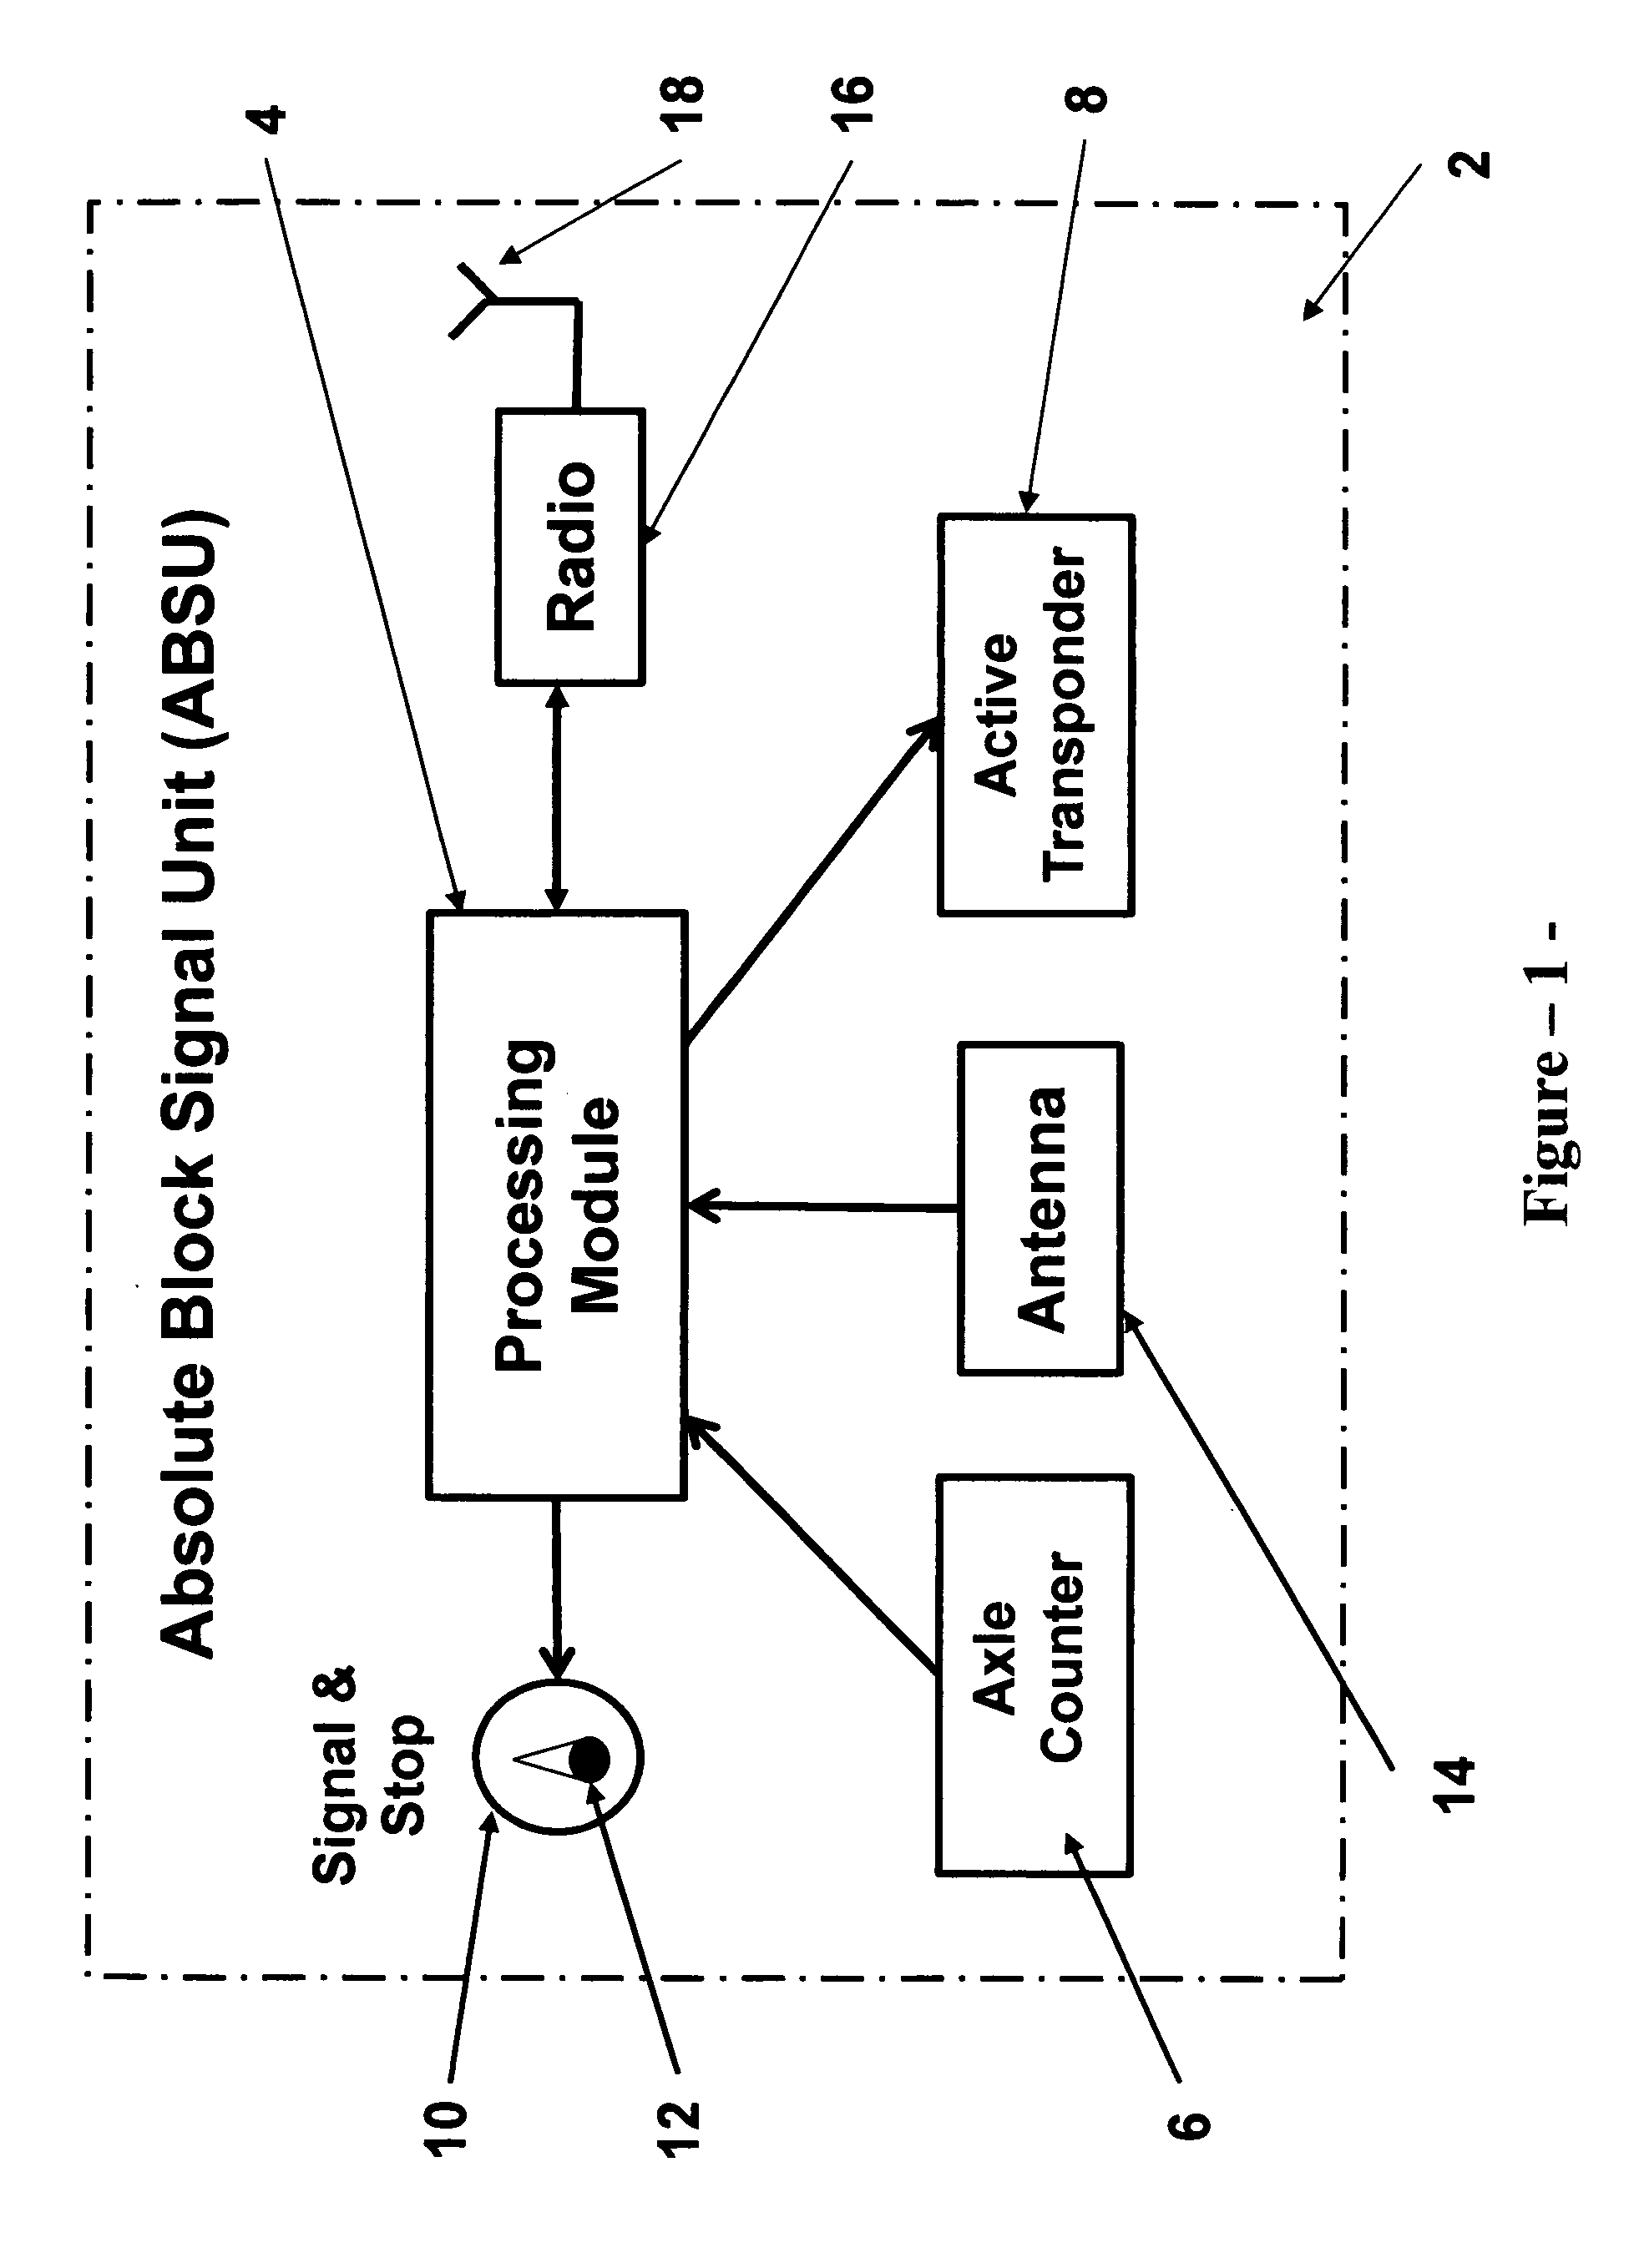 Method & apparatus for an auxiliary train control system